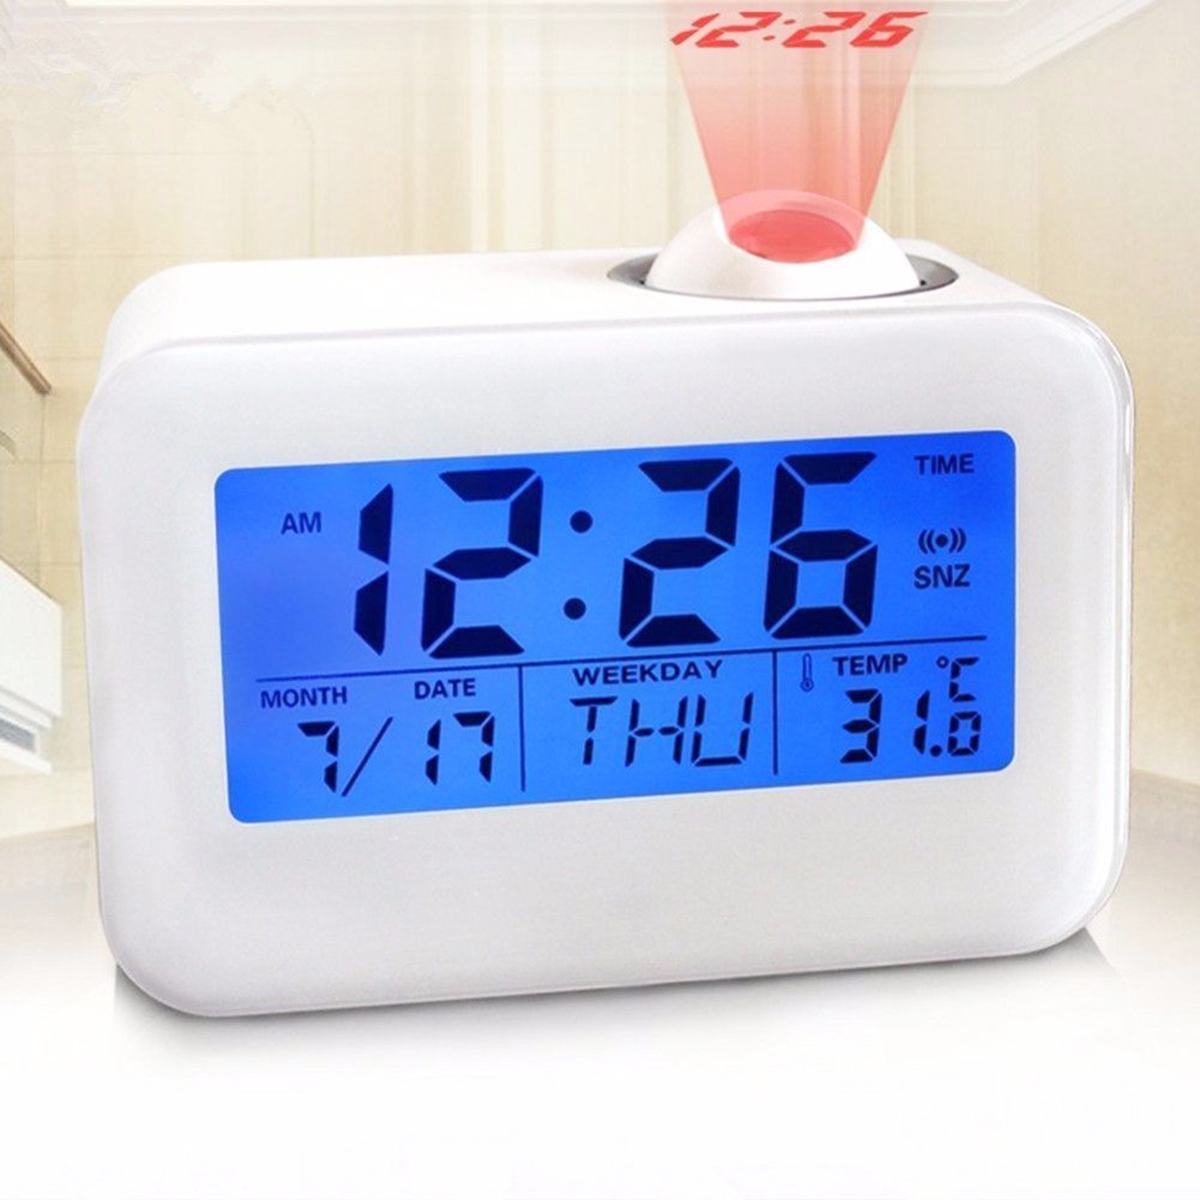 

Voice Sound Controlled Projection Talking LED Alarm Clock Snooze Date Projector